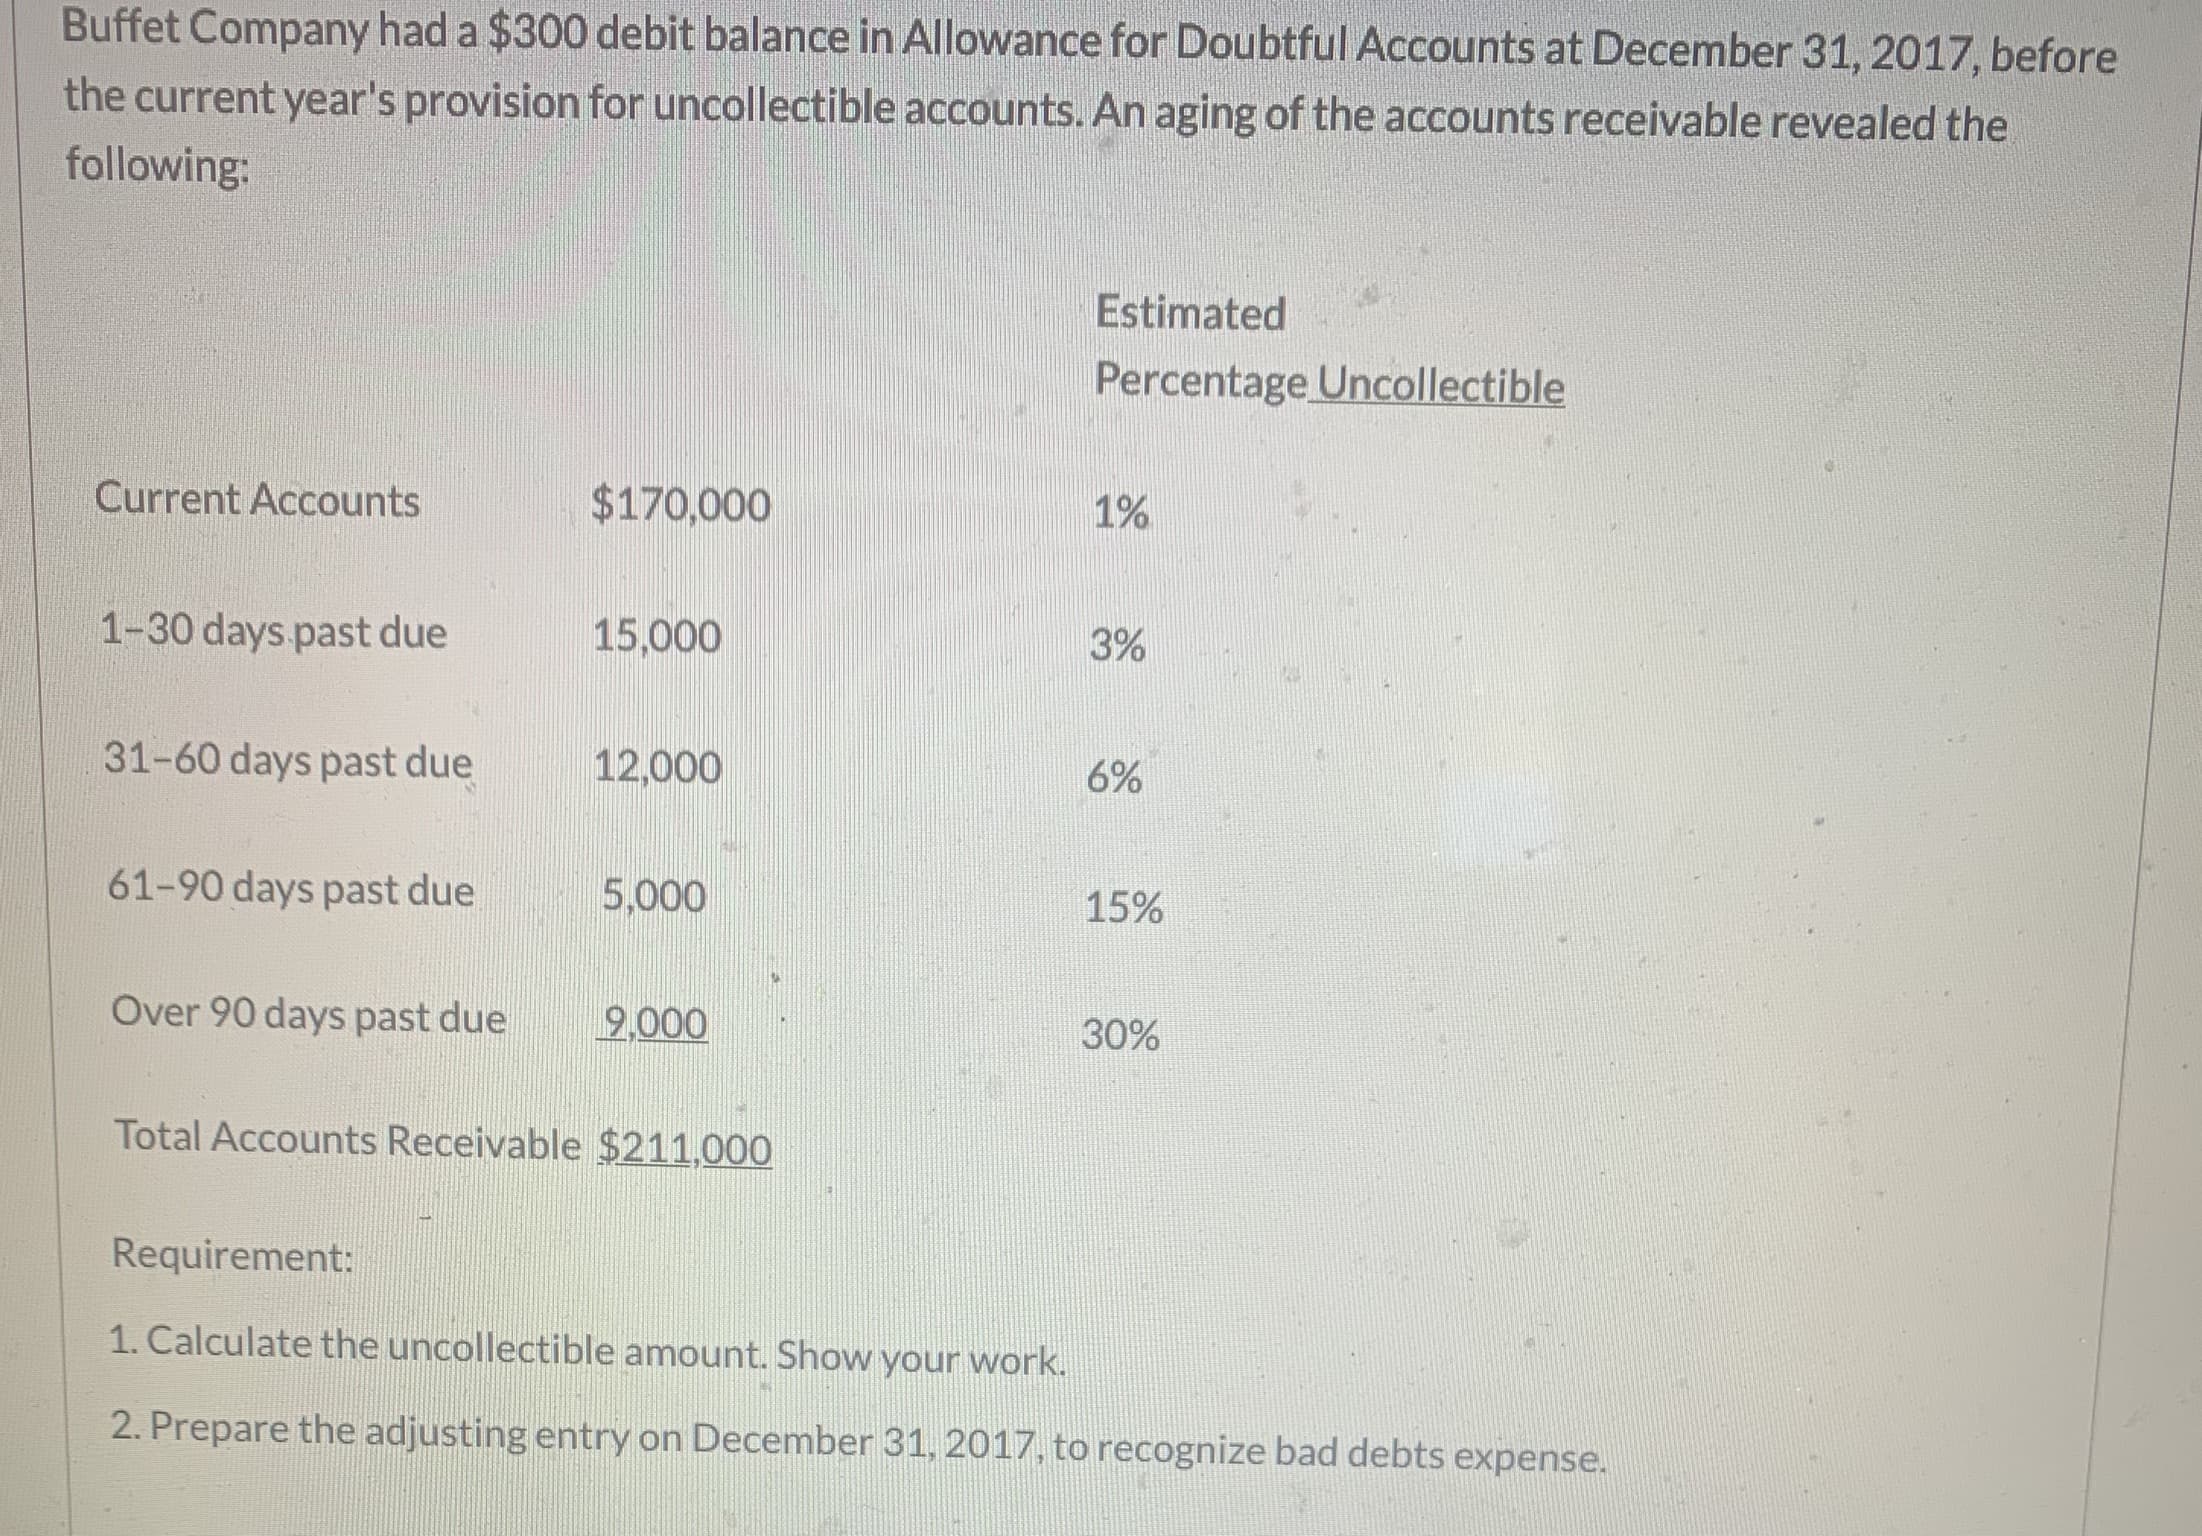 Buffet Company had a $300 debit balance in Allowance for Doubtful Accounts at December 31, 2017, before
the current year's provision for uncollectible accounts. An aging of the accounts receivable revealed the
following:
Estimated
Percentage Uncollectible
Current Accounts
$170,000
1%
1-30 days past due
15,000
3%
31-60 days past due
12,000
6%
61-90 days past due
5,000
15%
Over 90 days past due
9,000
30%
Total Accounts Receivable $211,000
Requirement:
1. Calculate the uncollectible amount. Show your work.
2. Prepare the adjusting entry on December 31, 2017, to recognize bad debts expense.
